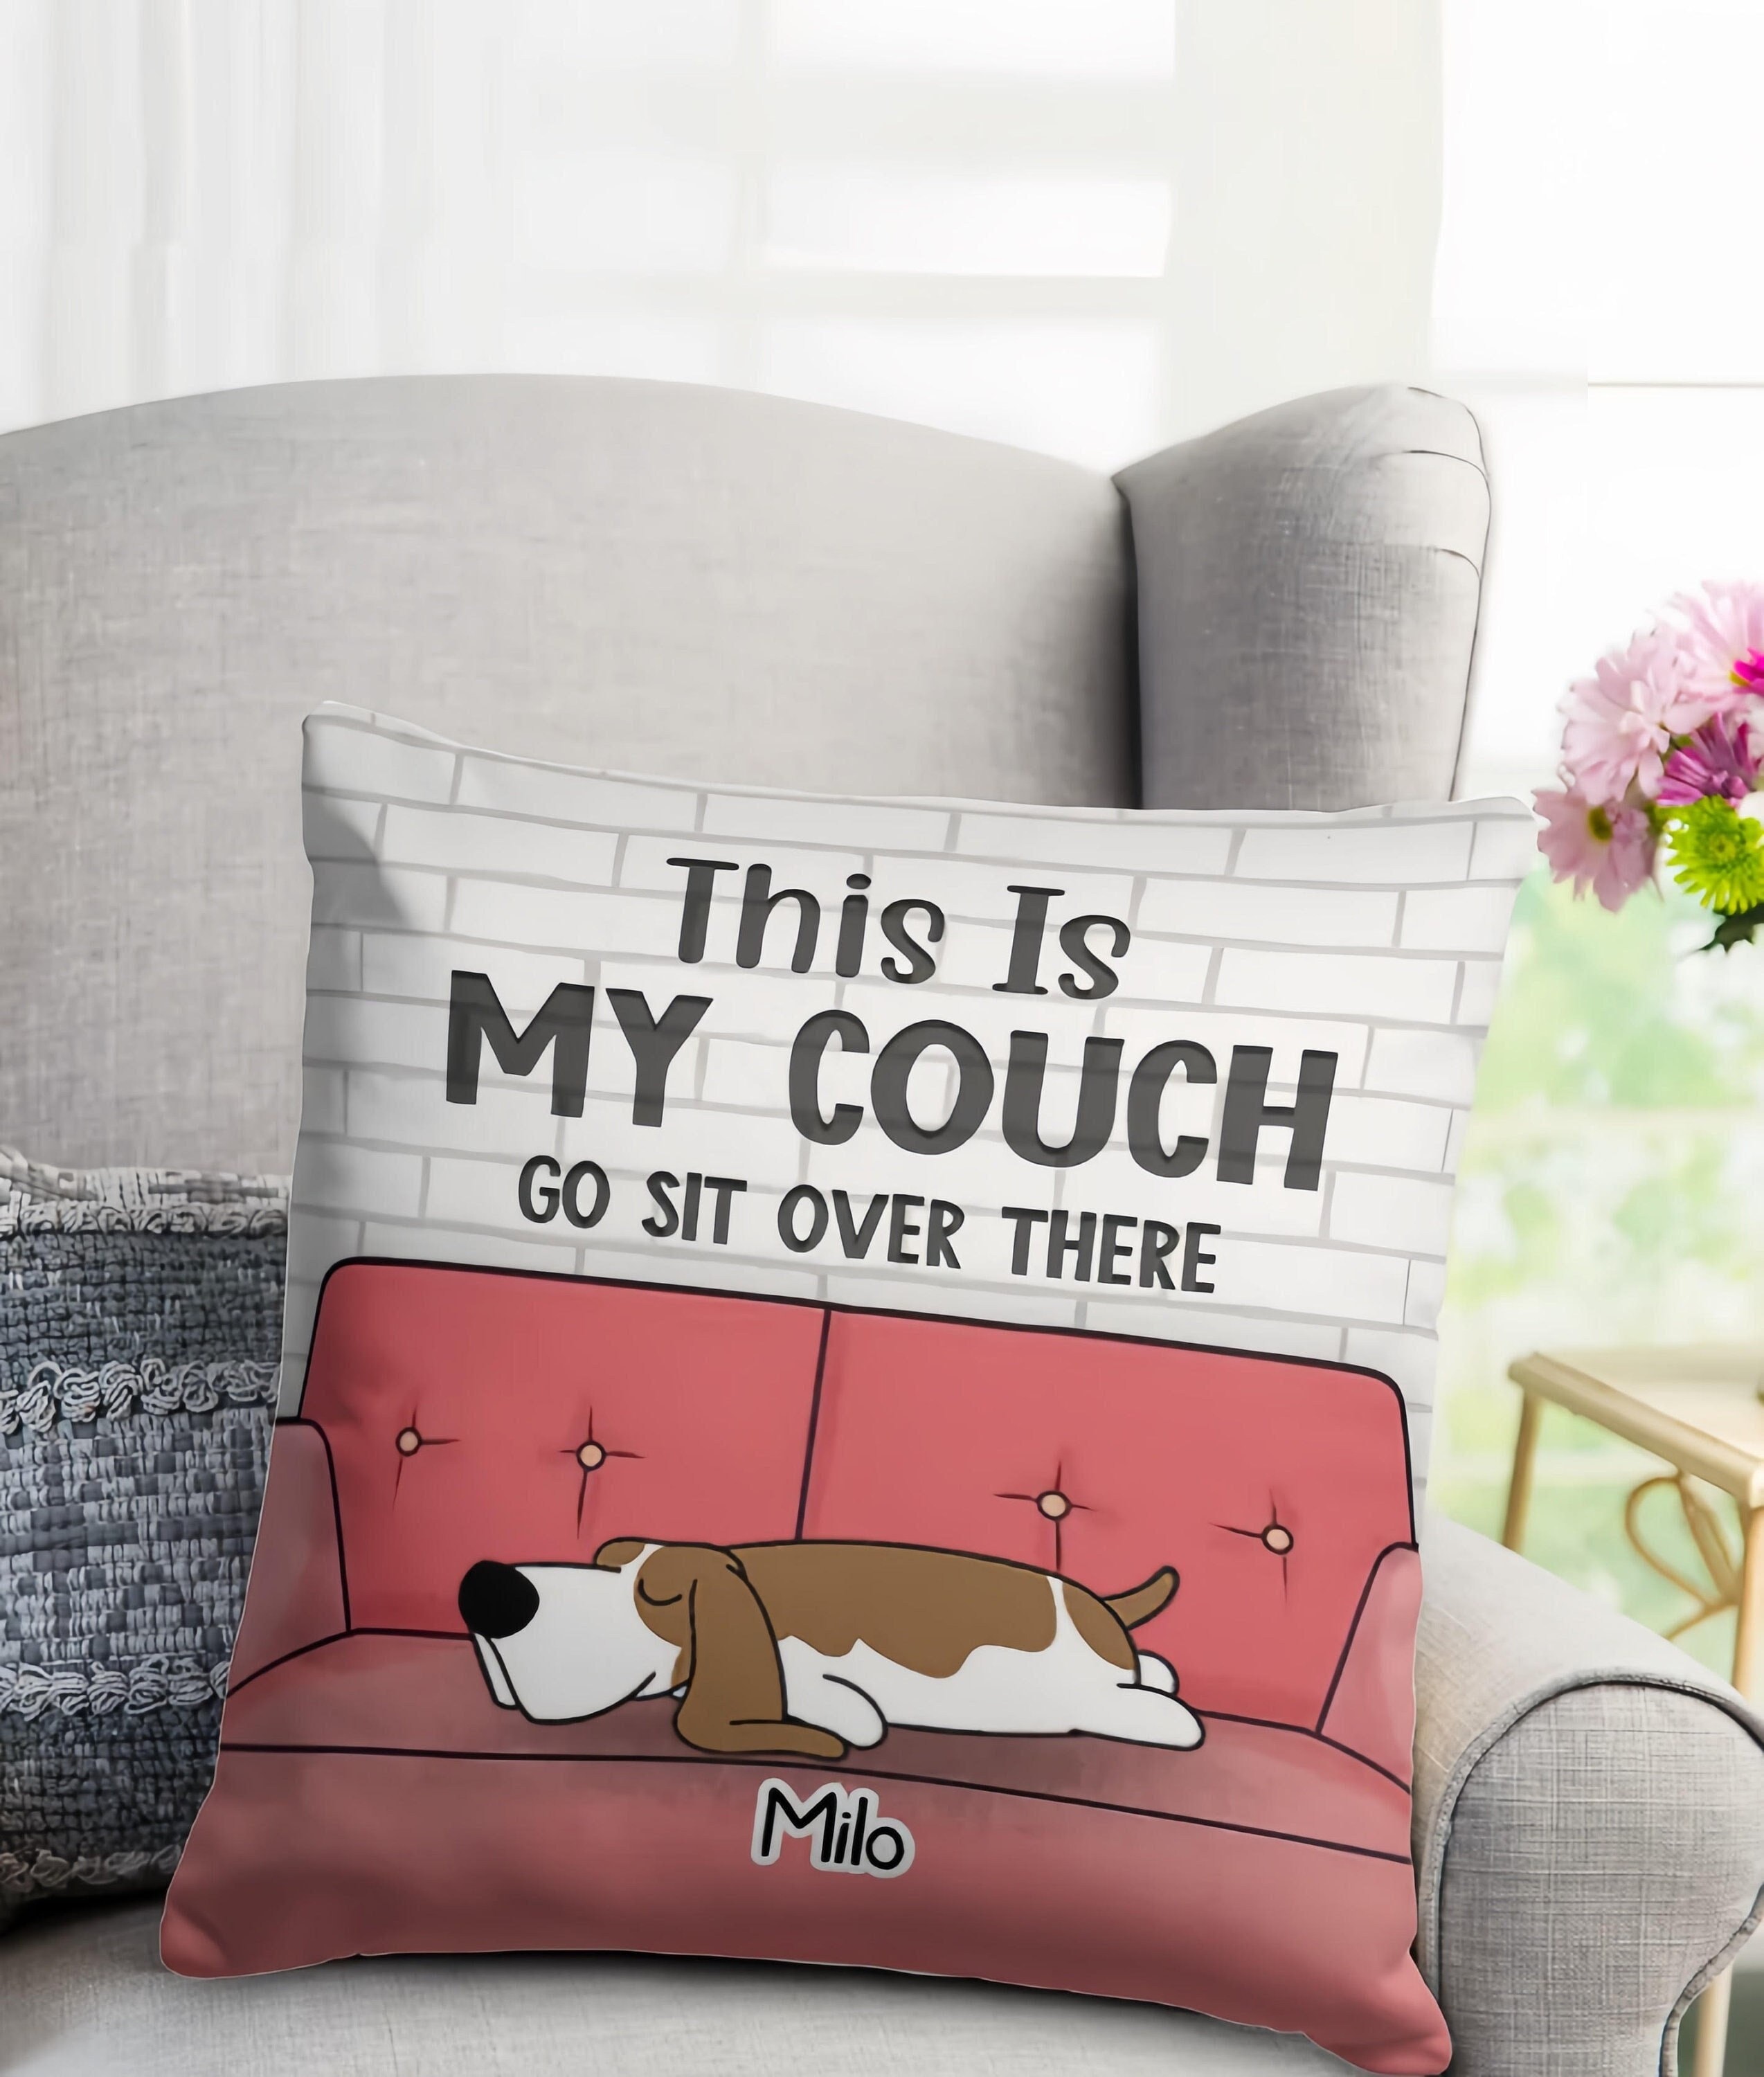 ARTSHOWING Throw Pillows for Bed Funny Animal Throw Pillow Cover Cushion  Case for Sofa Panda Thinker on Toilet Canvas Home Decor for Couch Bedroom